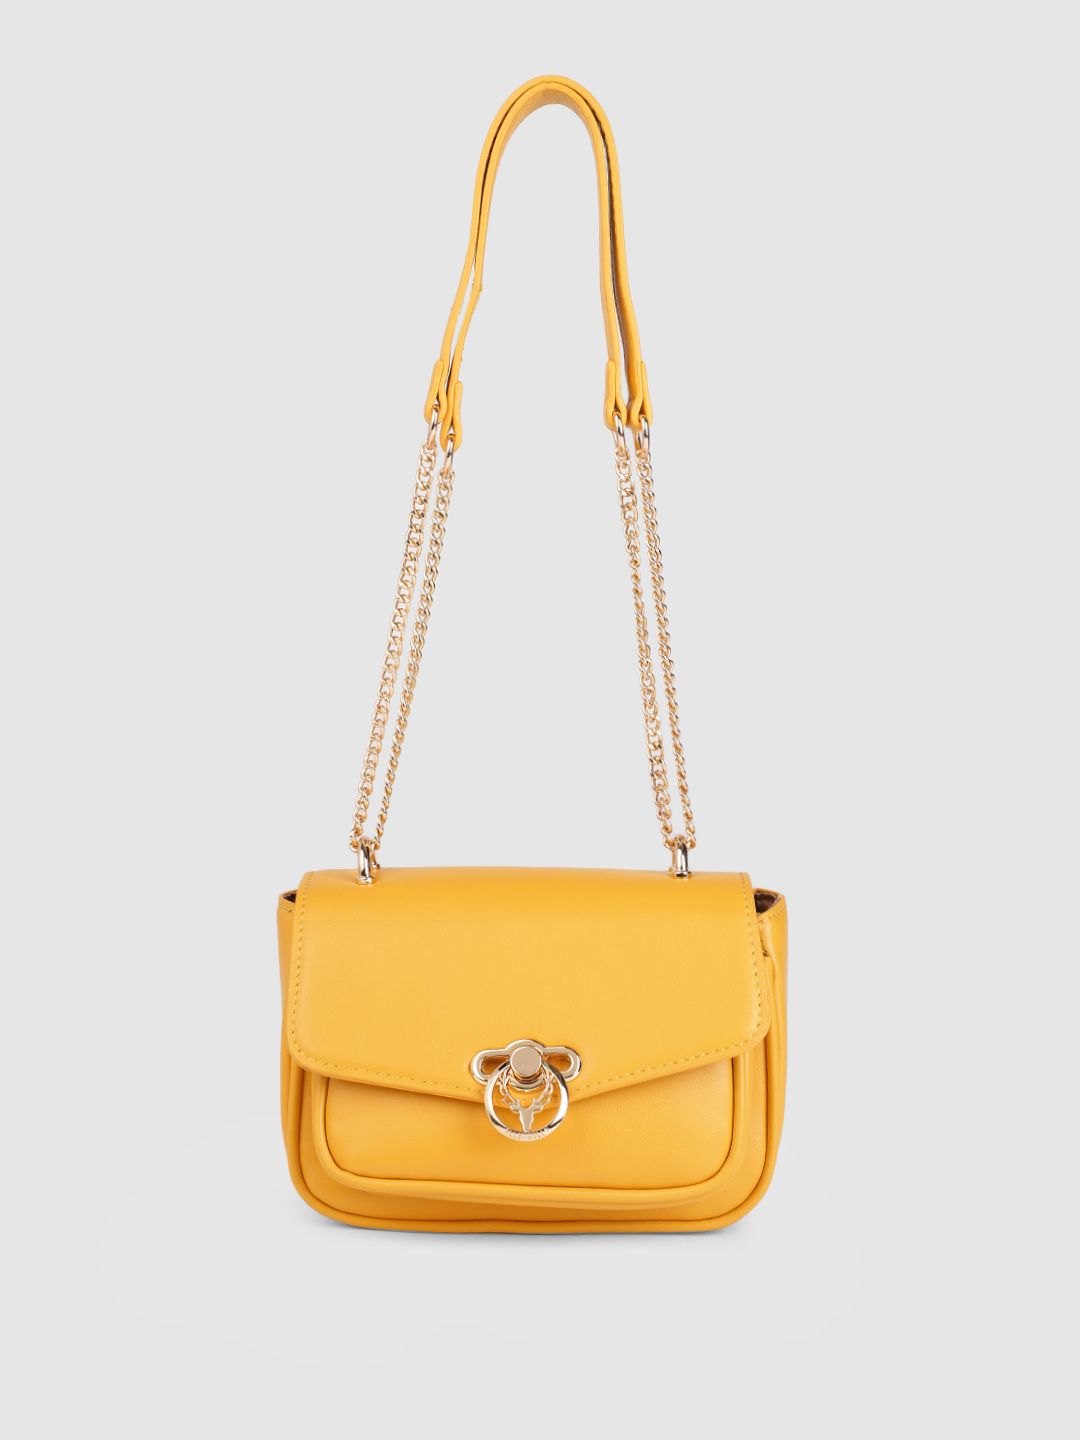 Allen Solly Mustard Yellow Solid Sling Bag Price in India